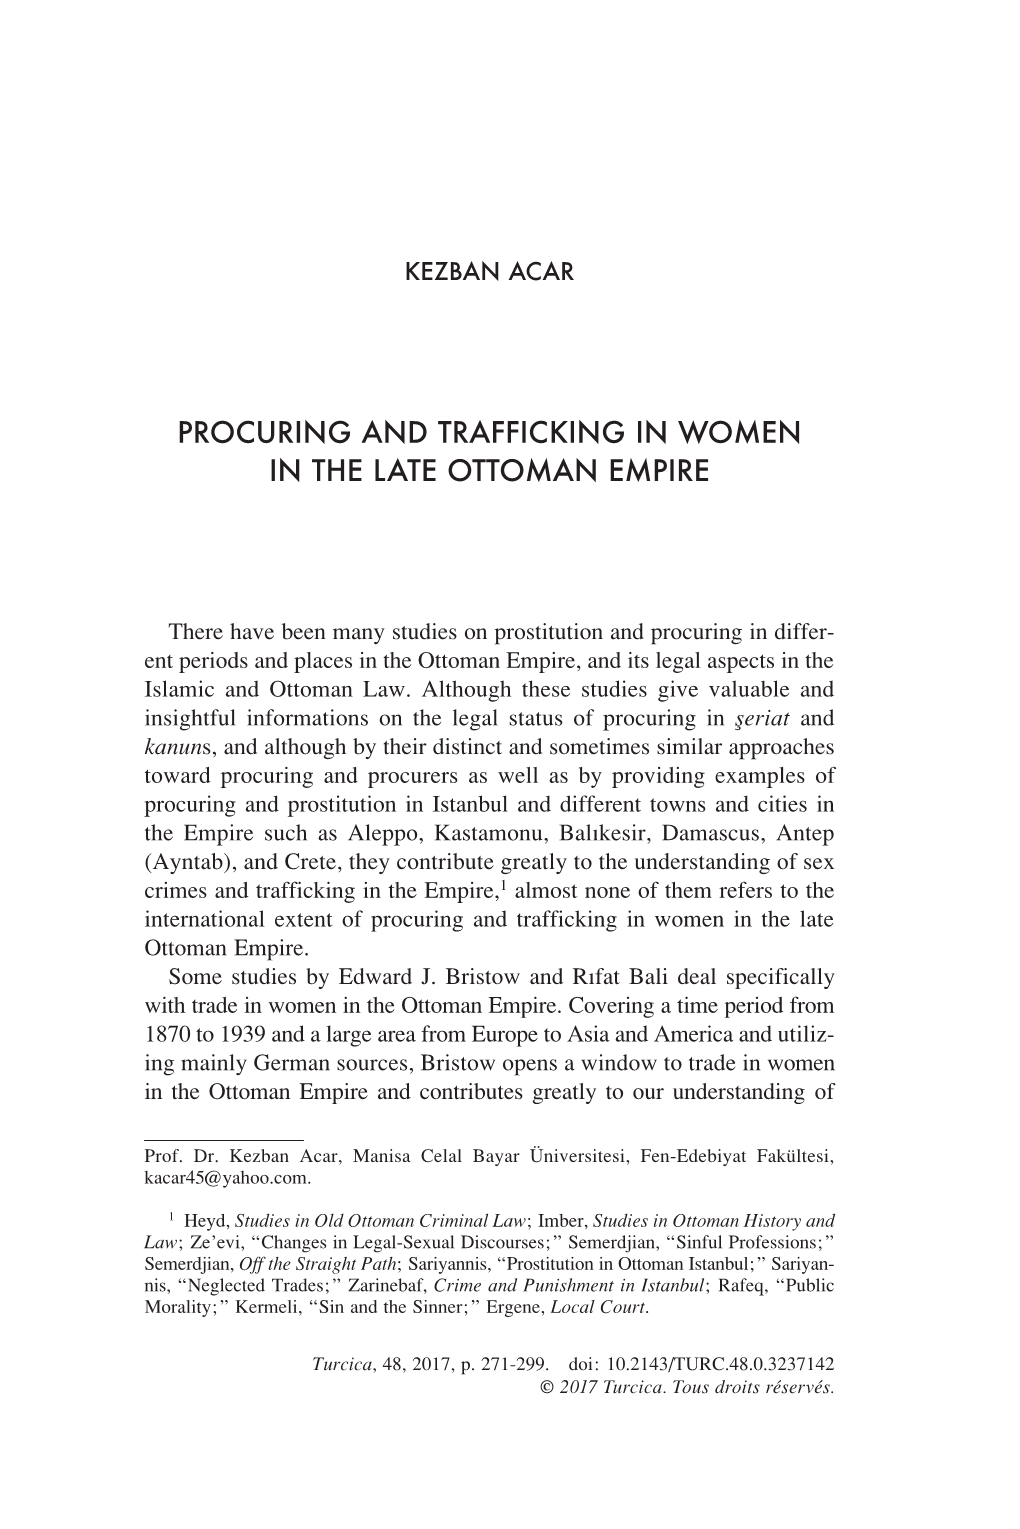 Procuring and Trafficking in Women in the Late Ottoman Empire